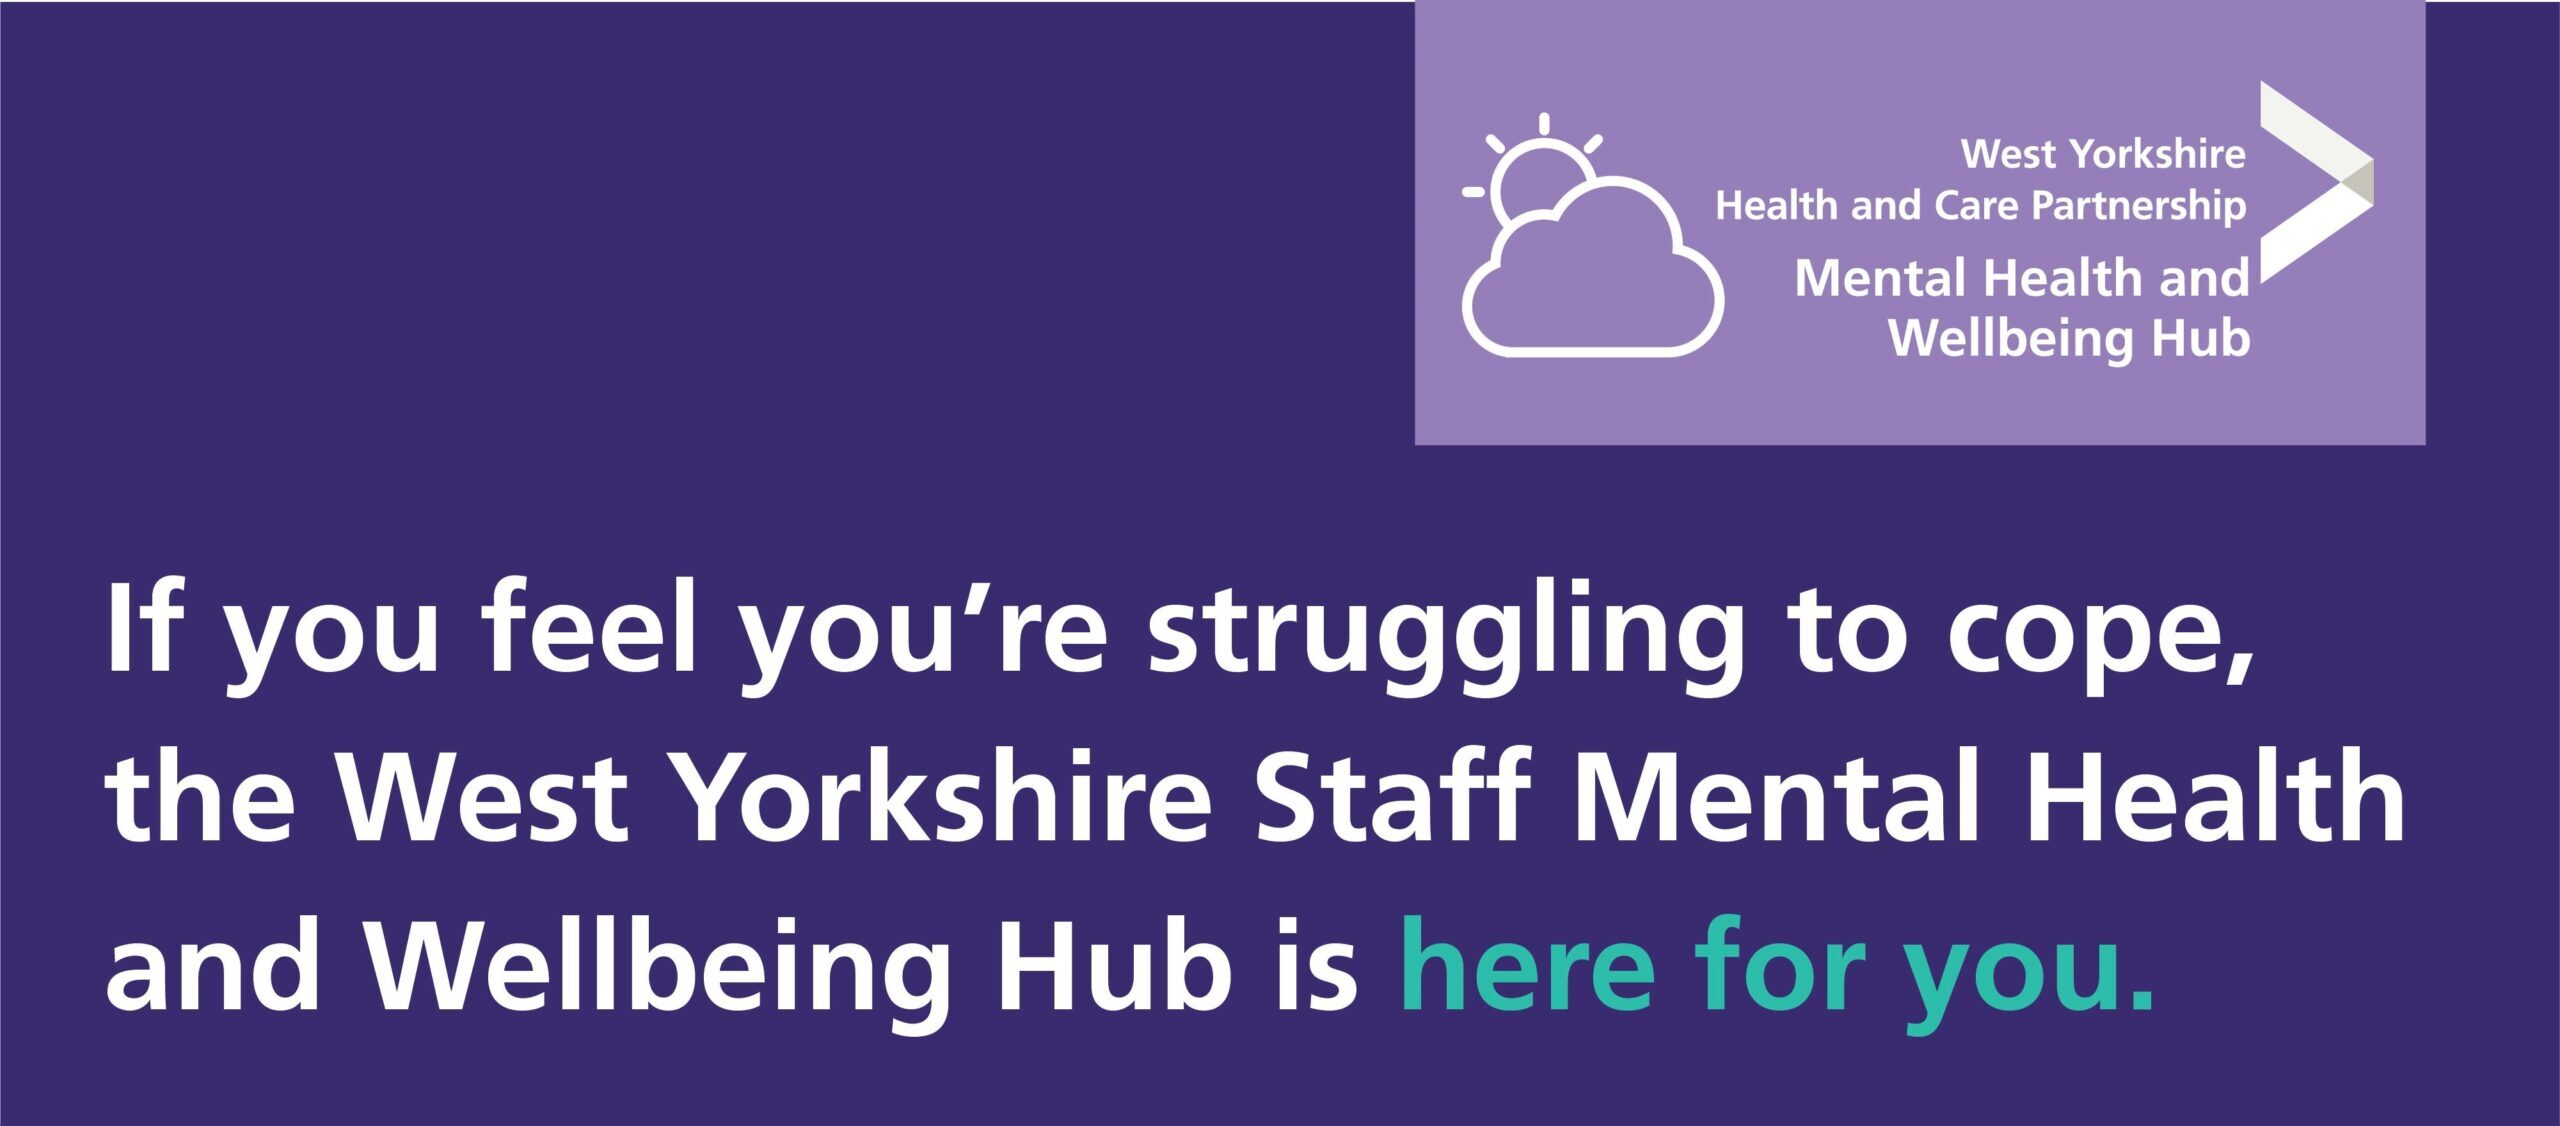 If you feel you're struggling to cope, the West Yorkshire Staff Mental Health and Wellbeing Hub is here for you.